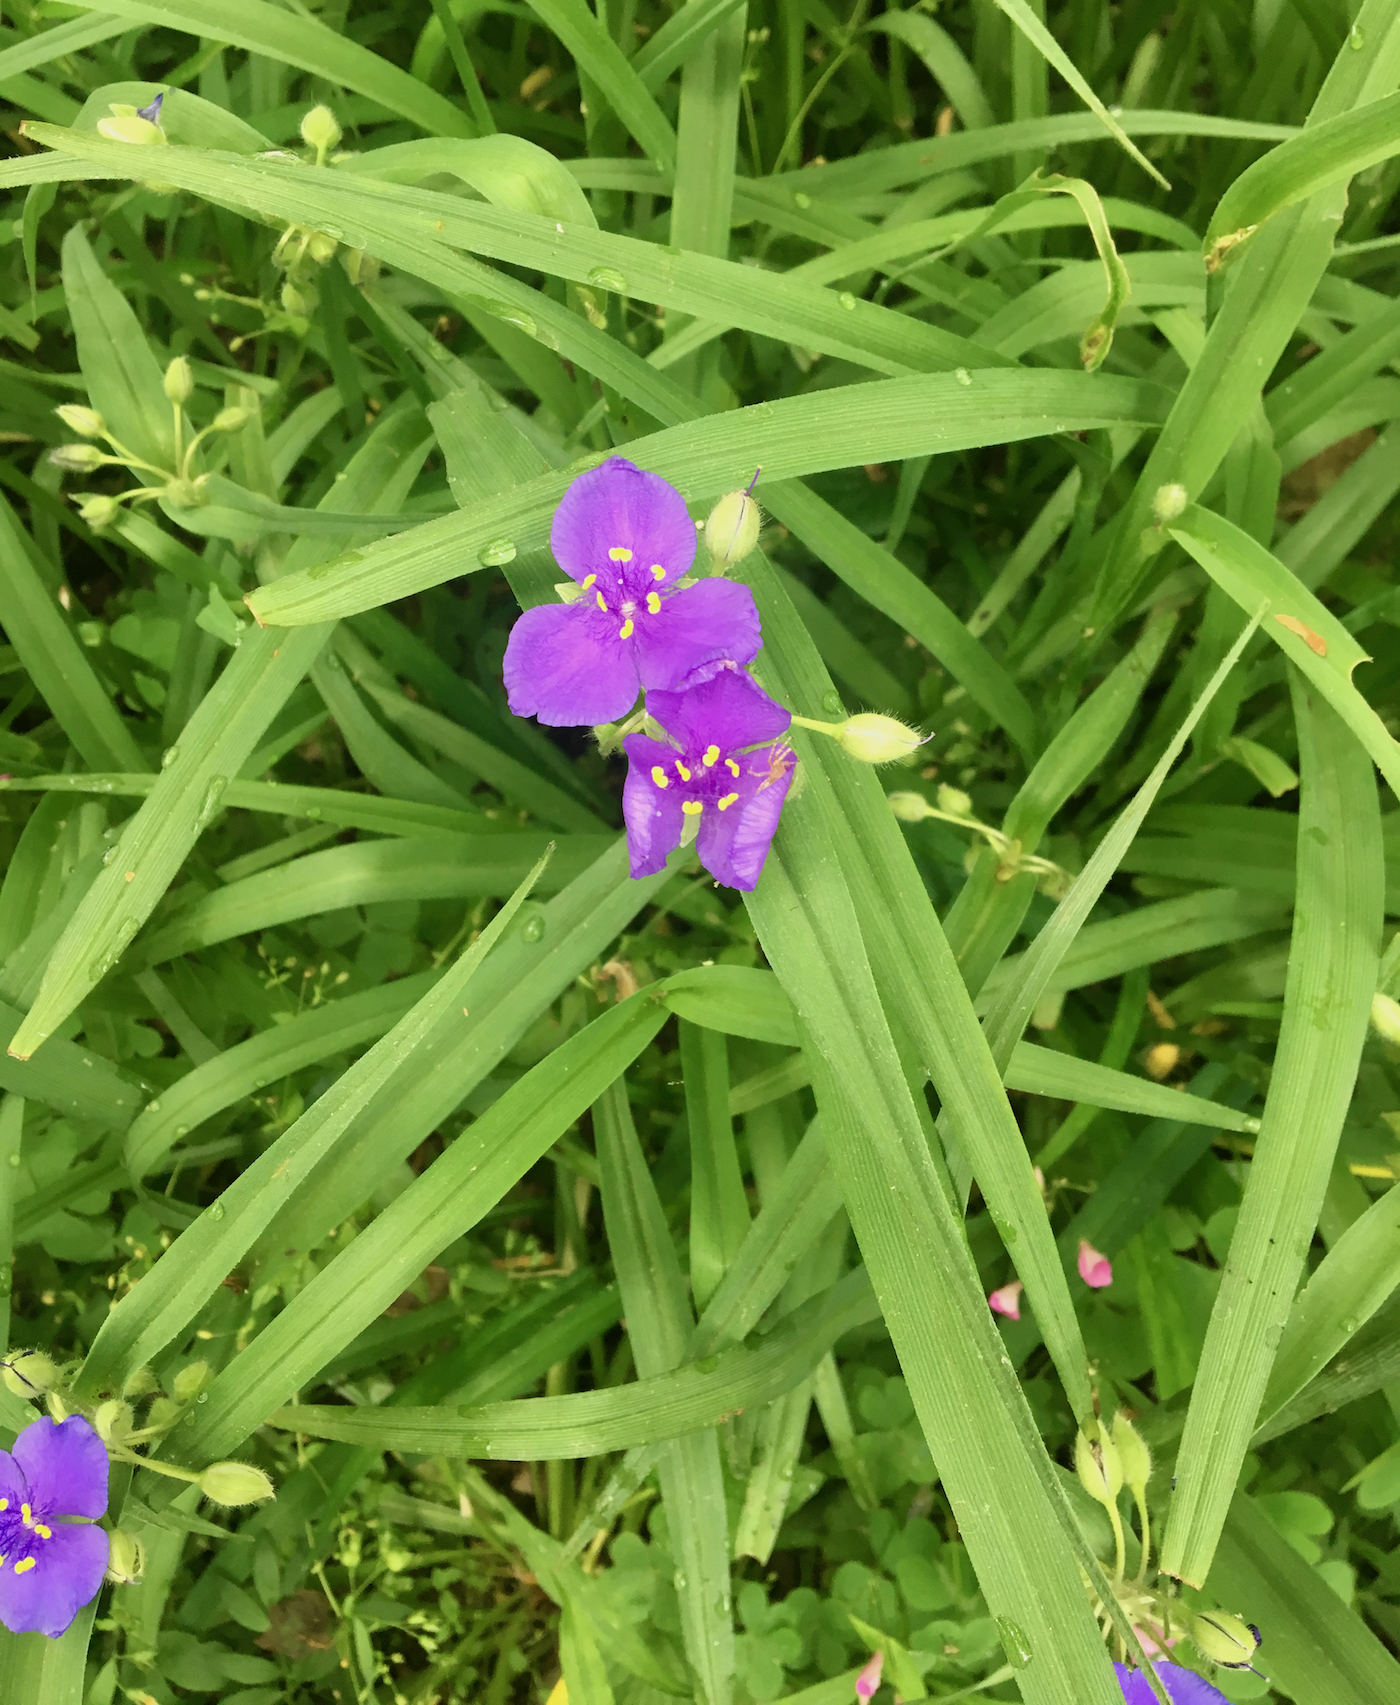 The Scientific Name is Tradescantia virginiana. You will likely hear them called Virginia Spiderwort. This picture shows the A branching, clump-forming perennial with linear leaves that form a sheath at the base. Principal leaf blades and bracts beneath the flowers not so wide as those of Zigzag Spiderwort.  of Tradescantia virginiana